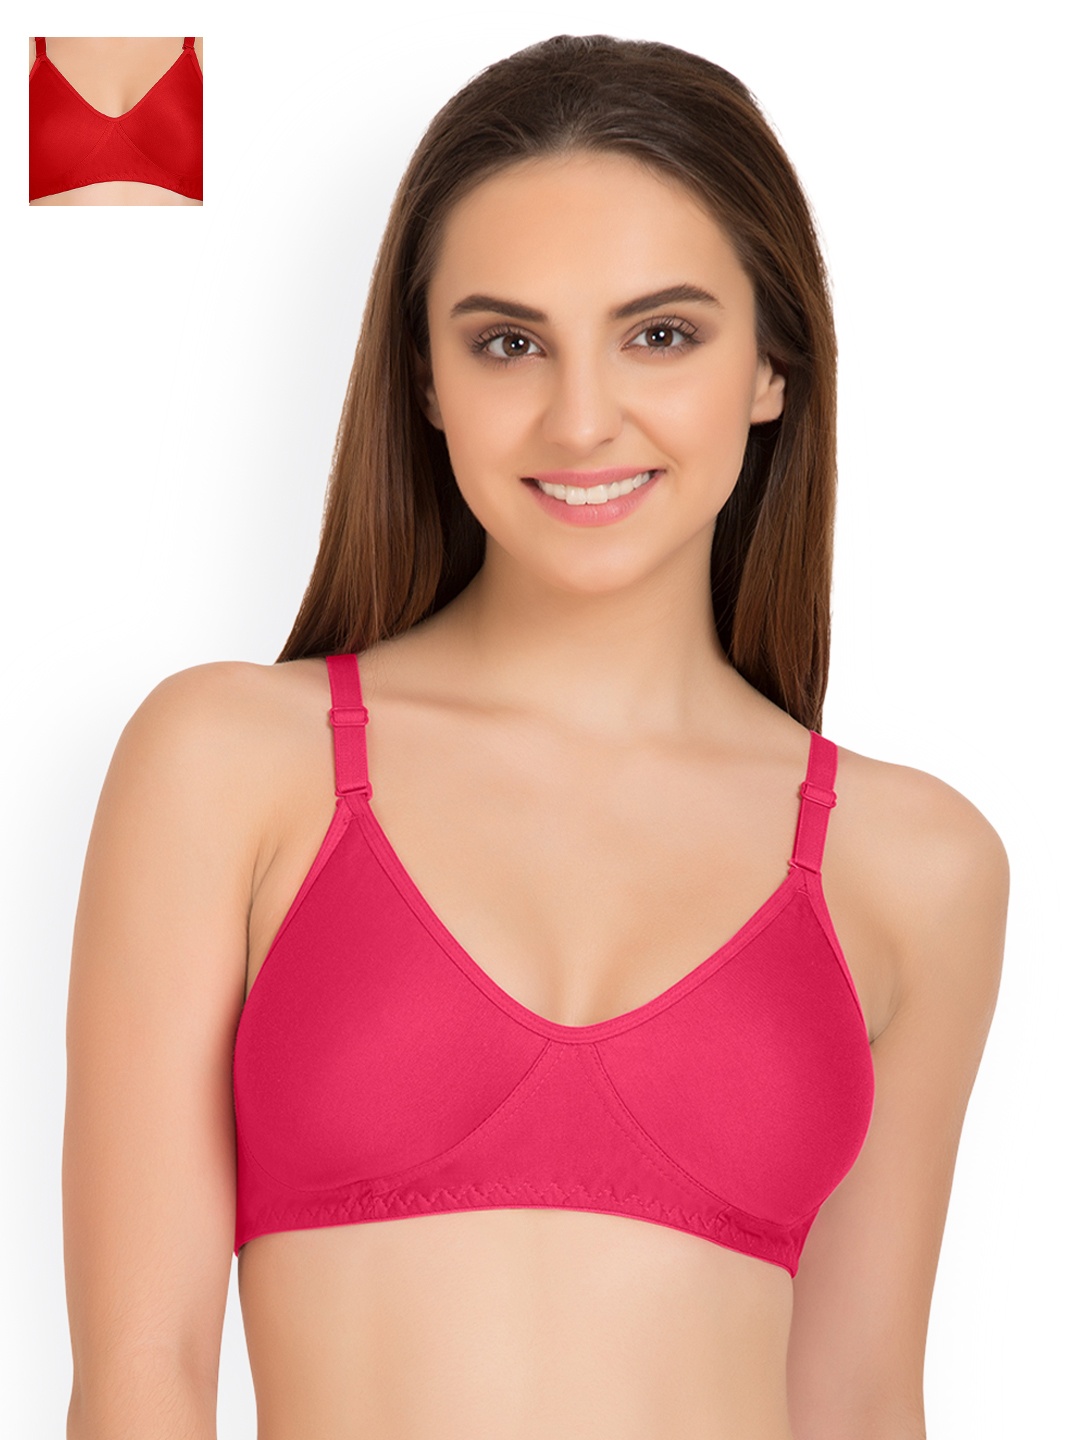 

Tweens Pack of 2 Full-Coverage T-shirt Bras TW9253DPK-2PC-RD, Pink